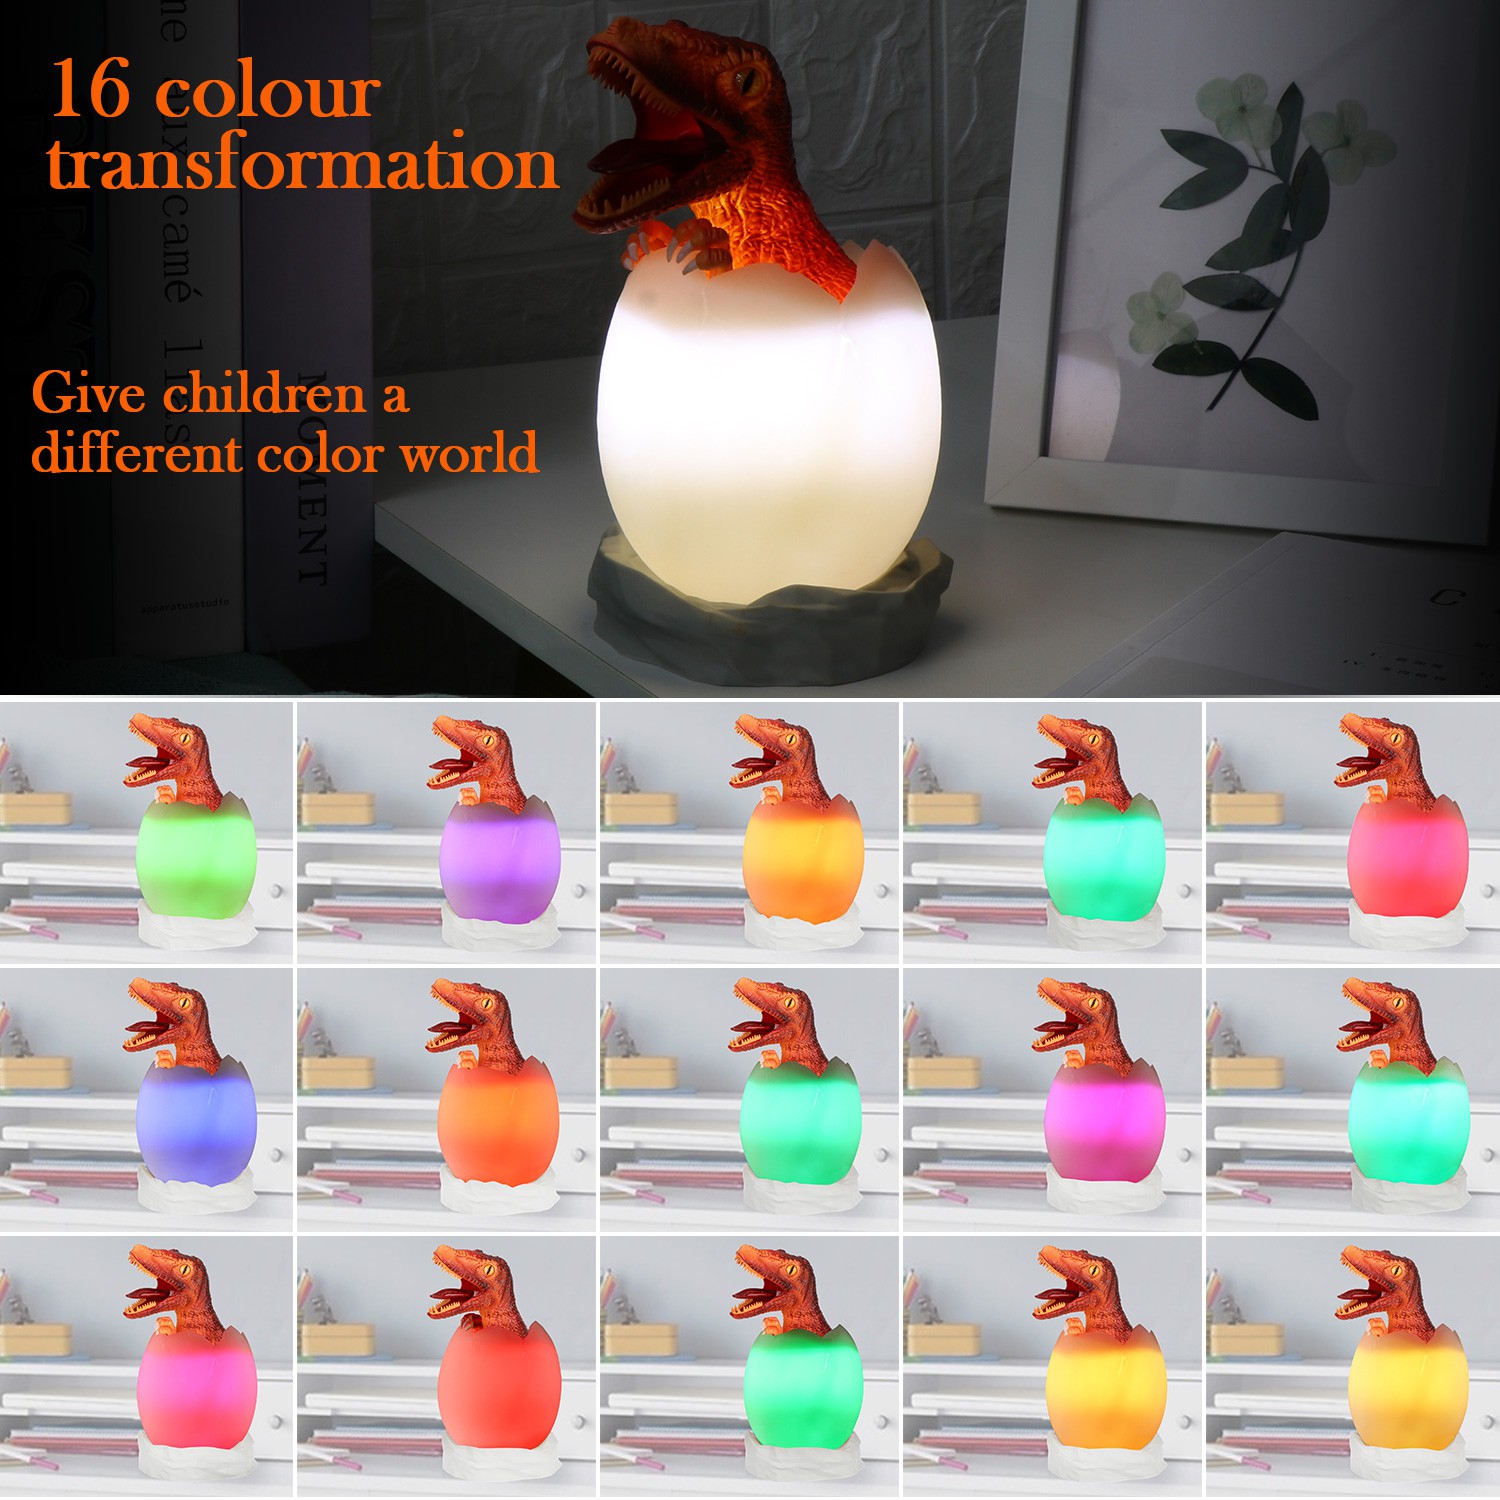 ❤LANSEL❤ Valentines Gifts for Kids 3D dinosaur lamp Children atmosphere Creative gift Night light Remote Touch Control Function 16 Colors Changing Bedroom Boys Room Decor Bedside table Dinosaur egg